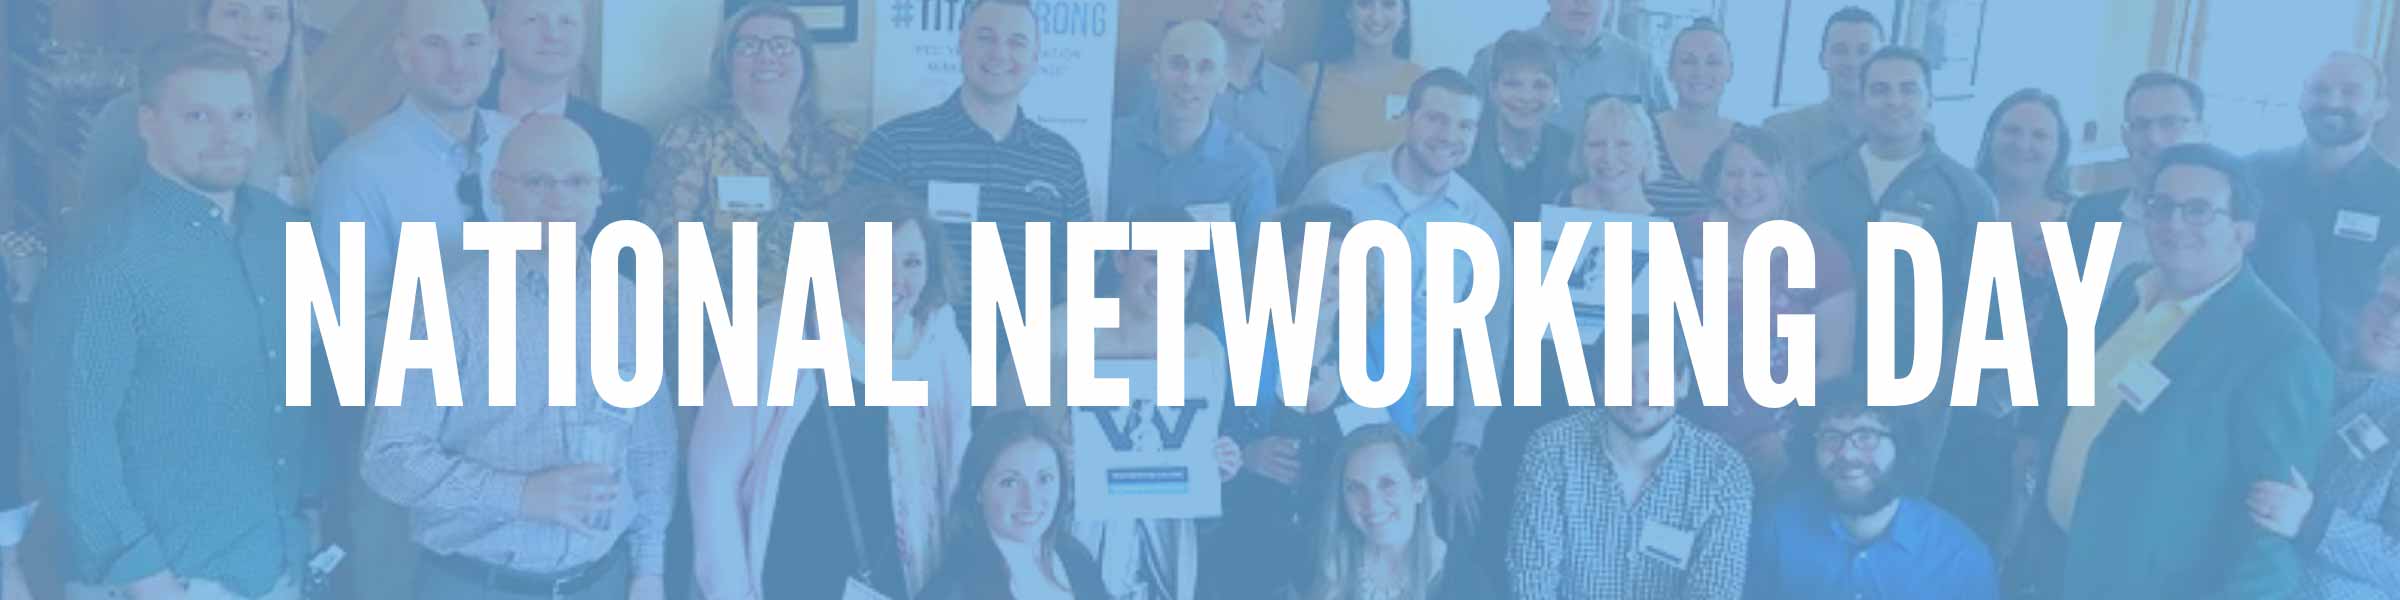 National Networking Day